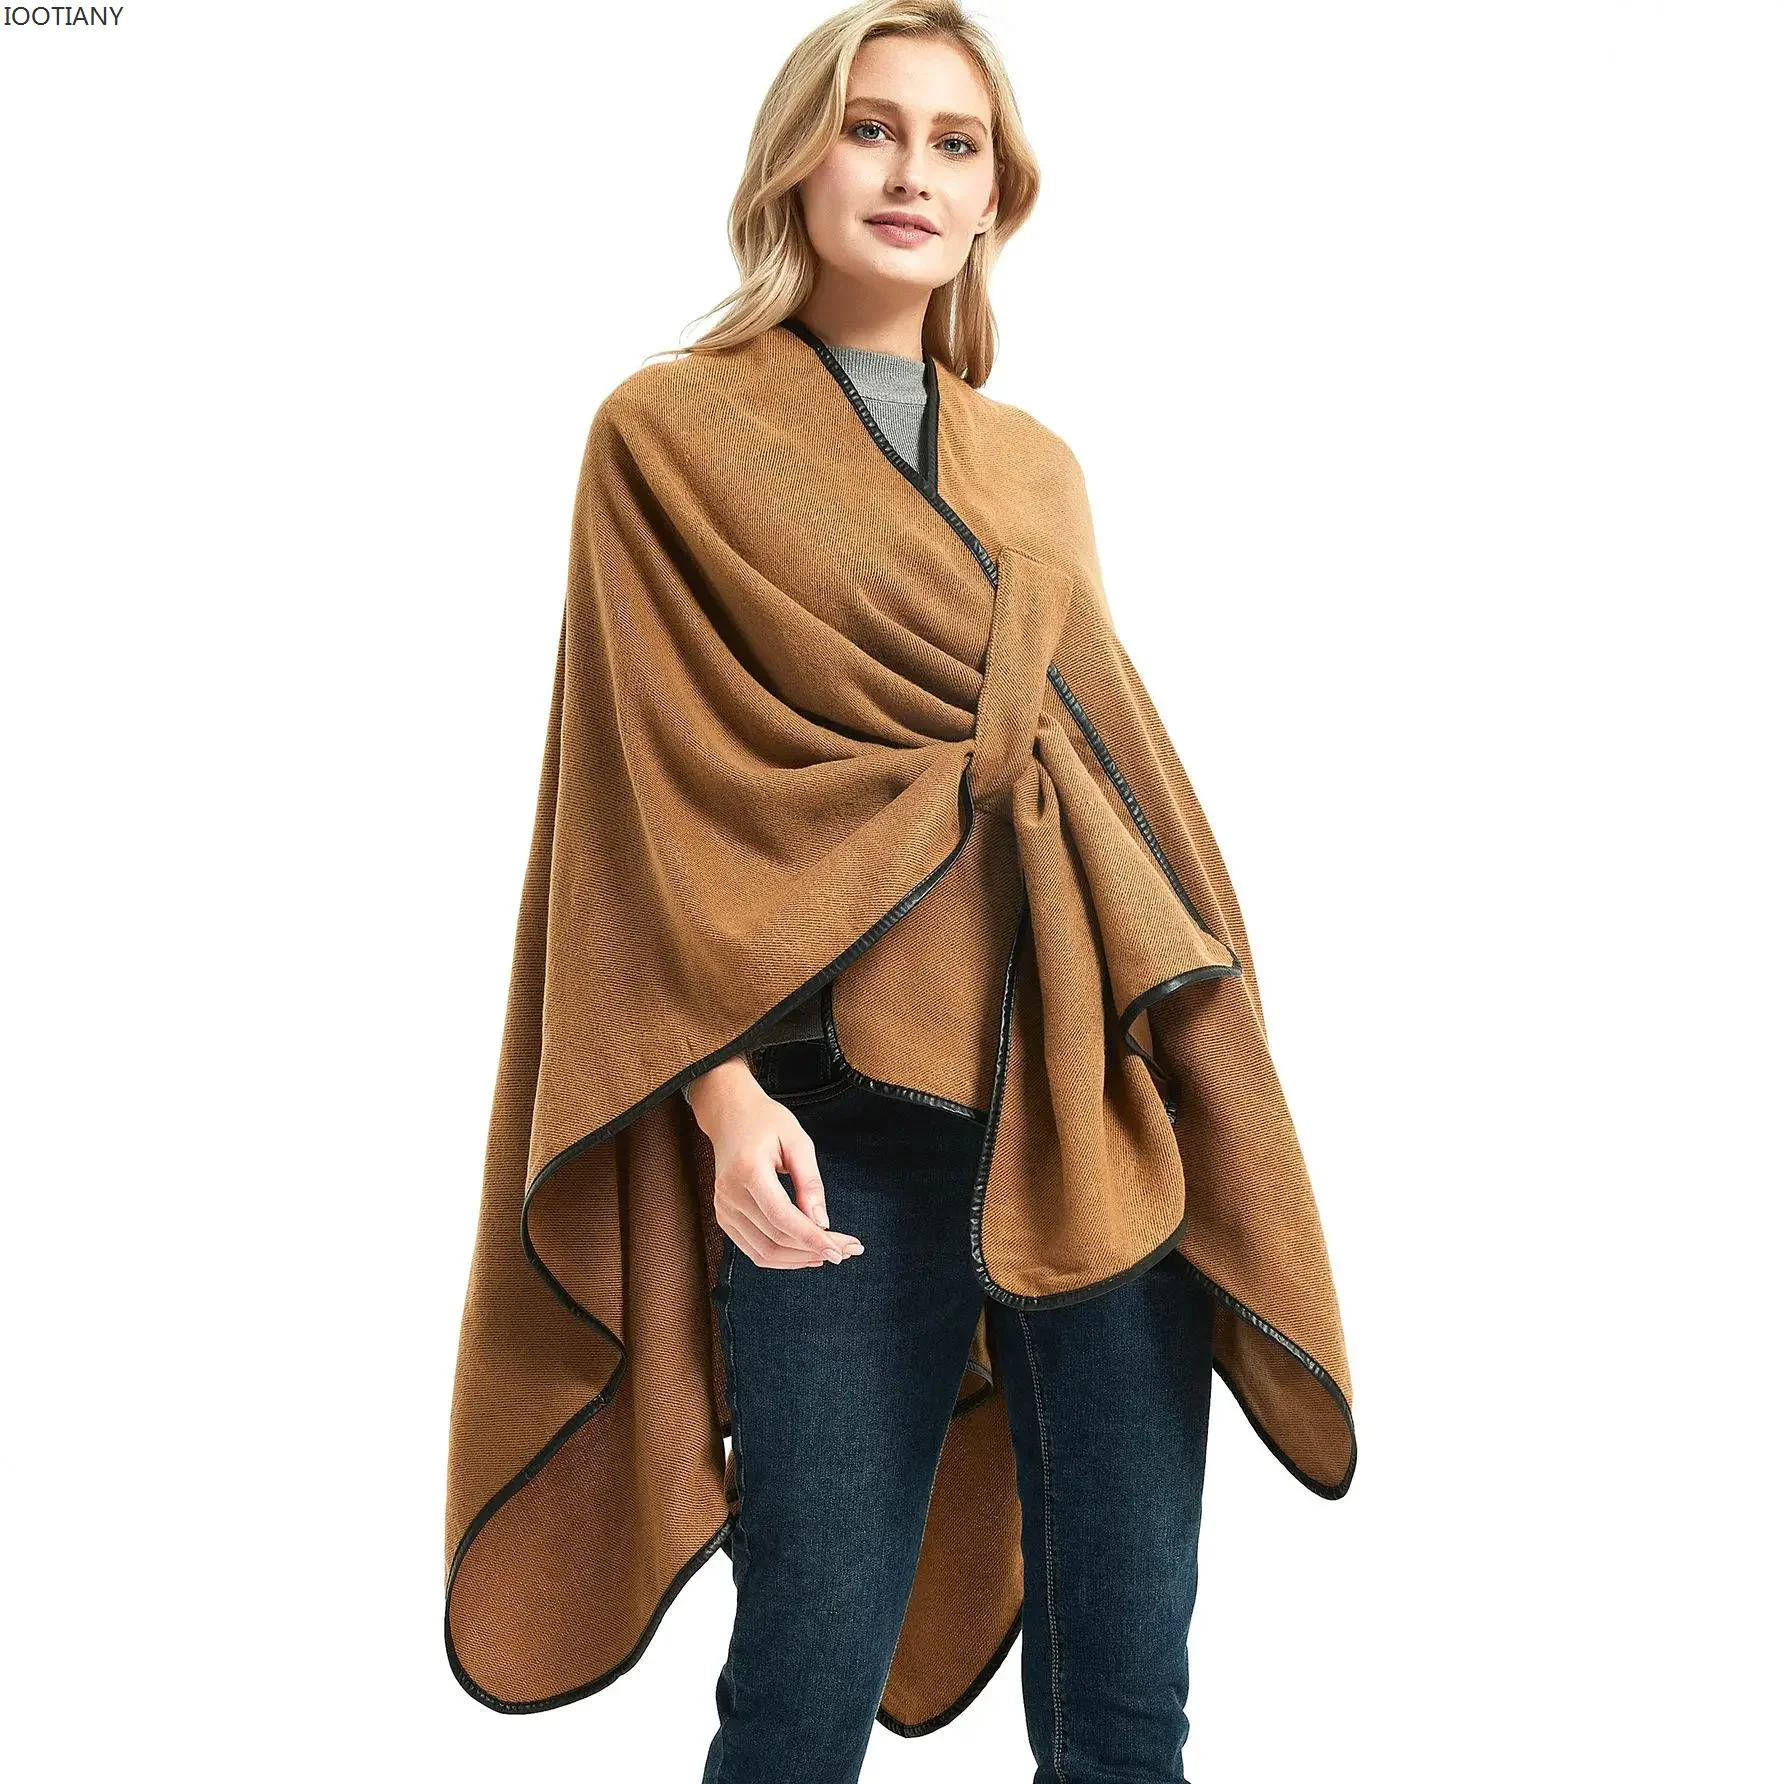 

IOOTIANY Buckle Leather Edge Solid Color Camel Open Fork Shawl Europe And America Fashion Lady Shawl Loose Irregular Outerwear